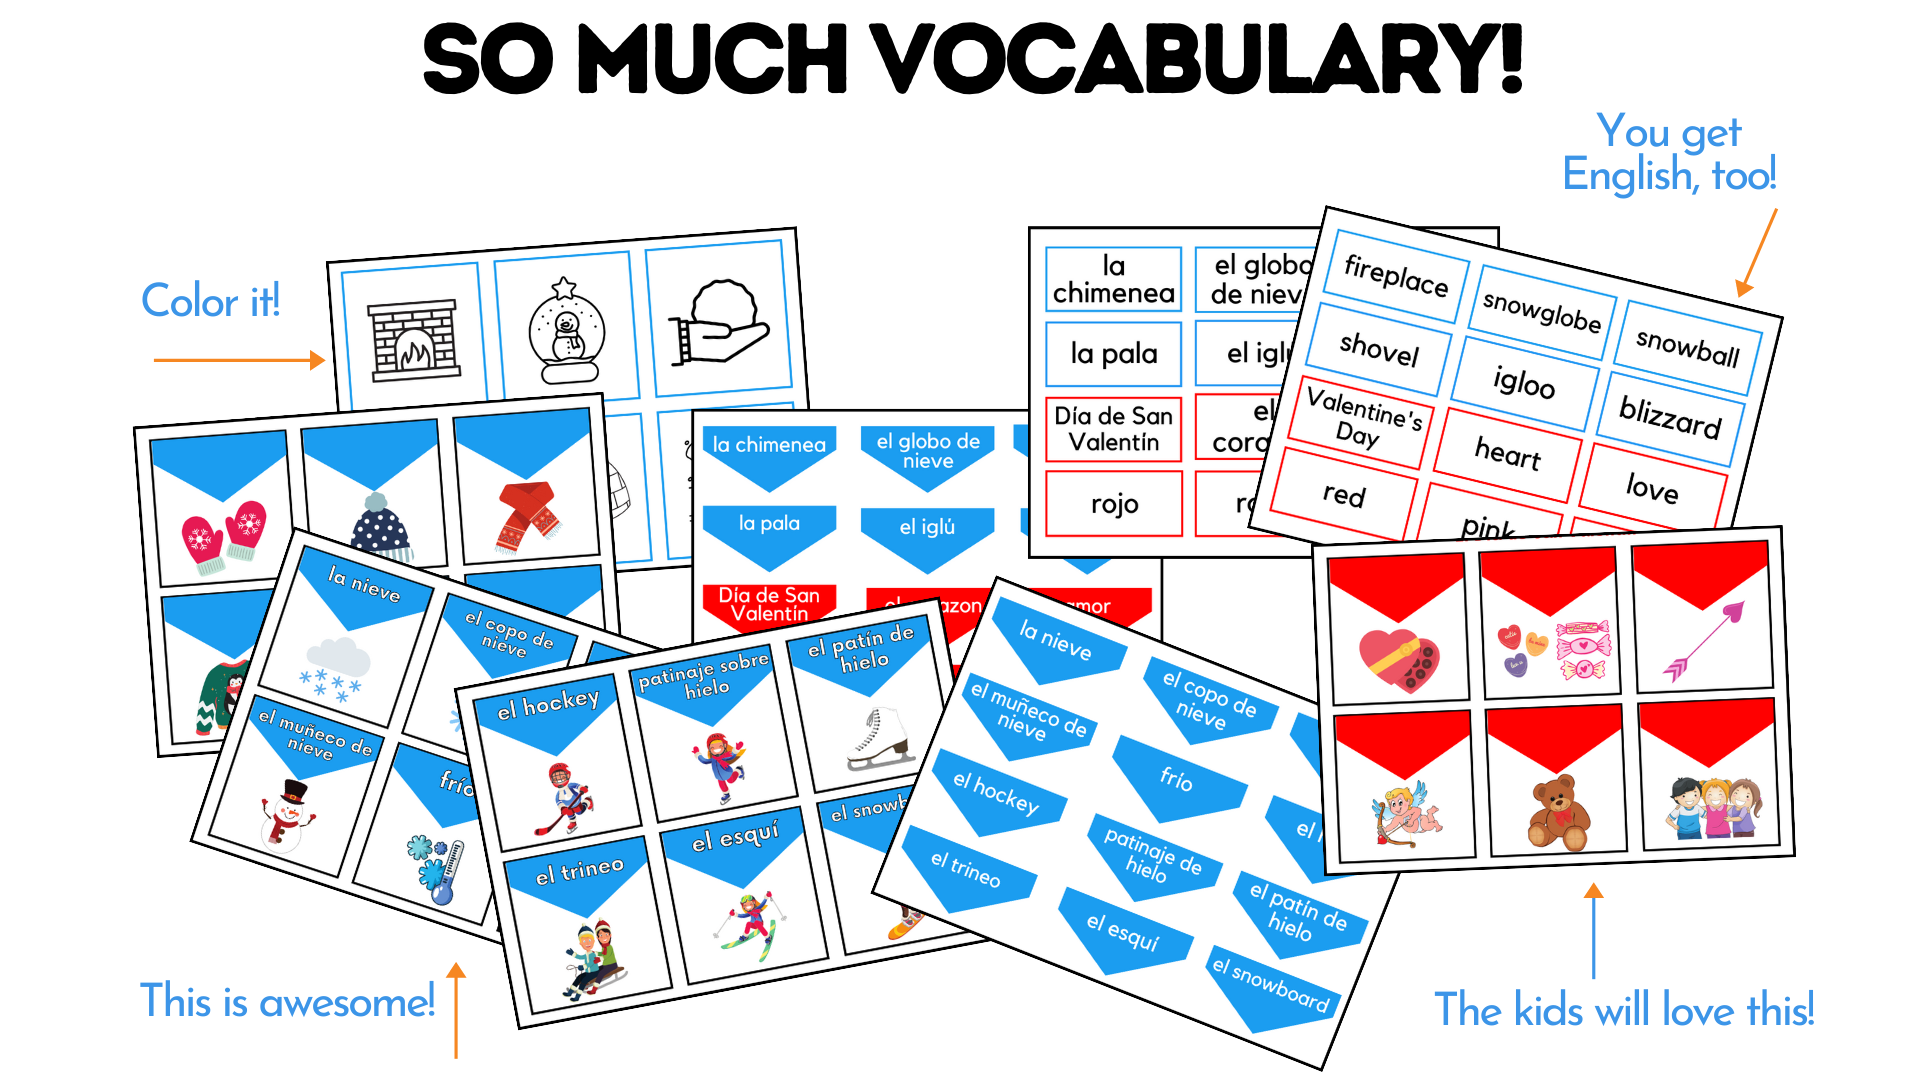 Sample pages of Winter Vocabulary Cards in Spanish/Dual Language: Vocabulary de invierno